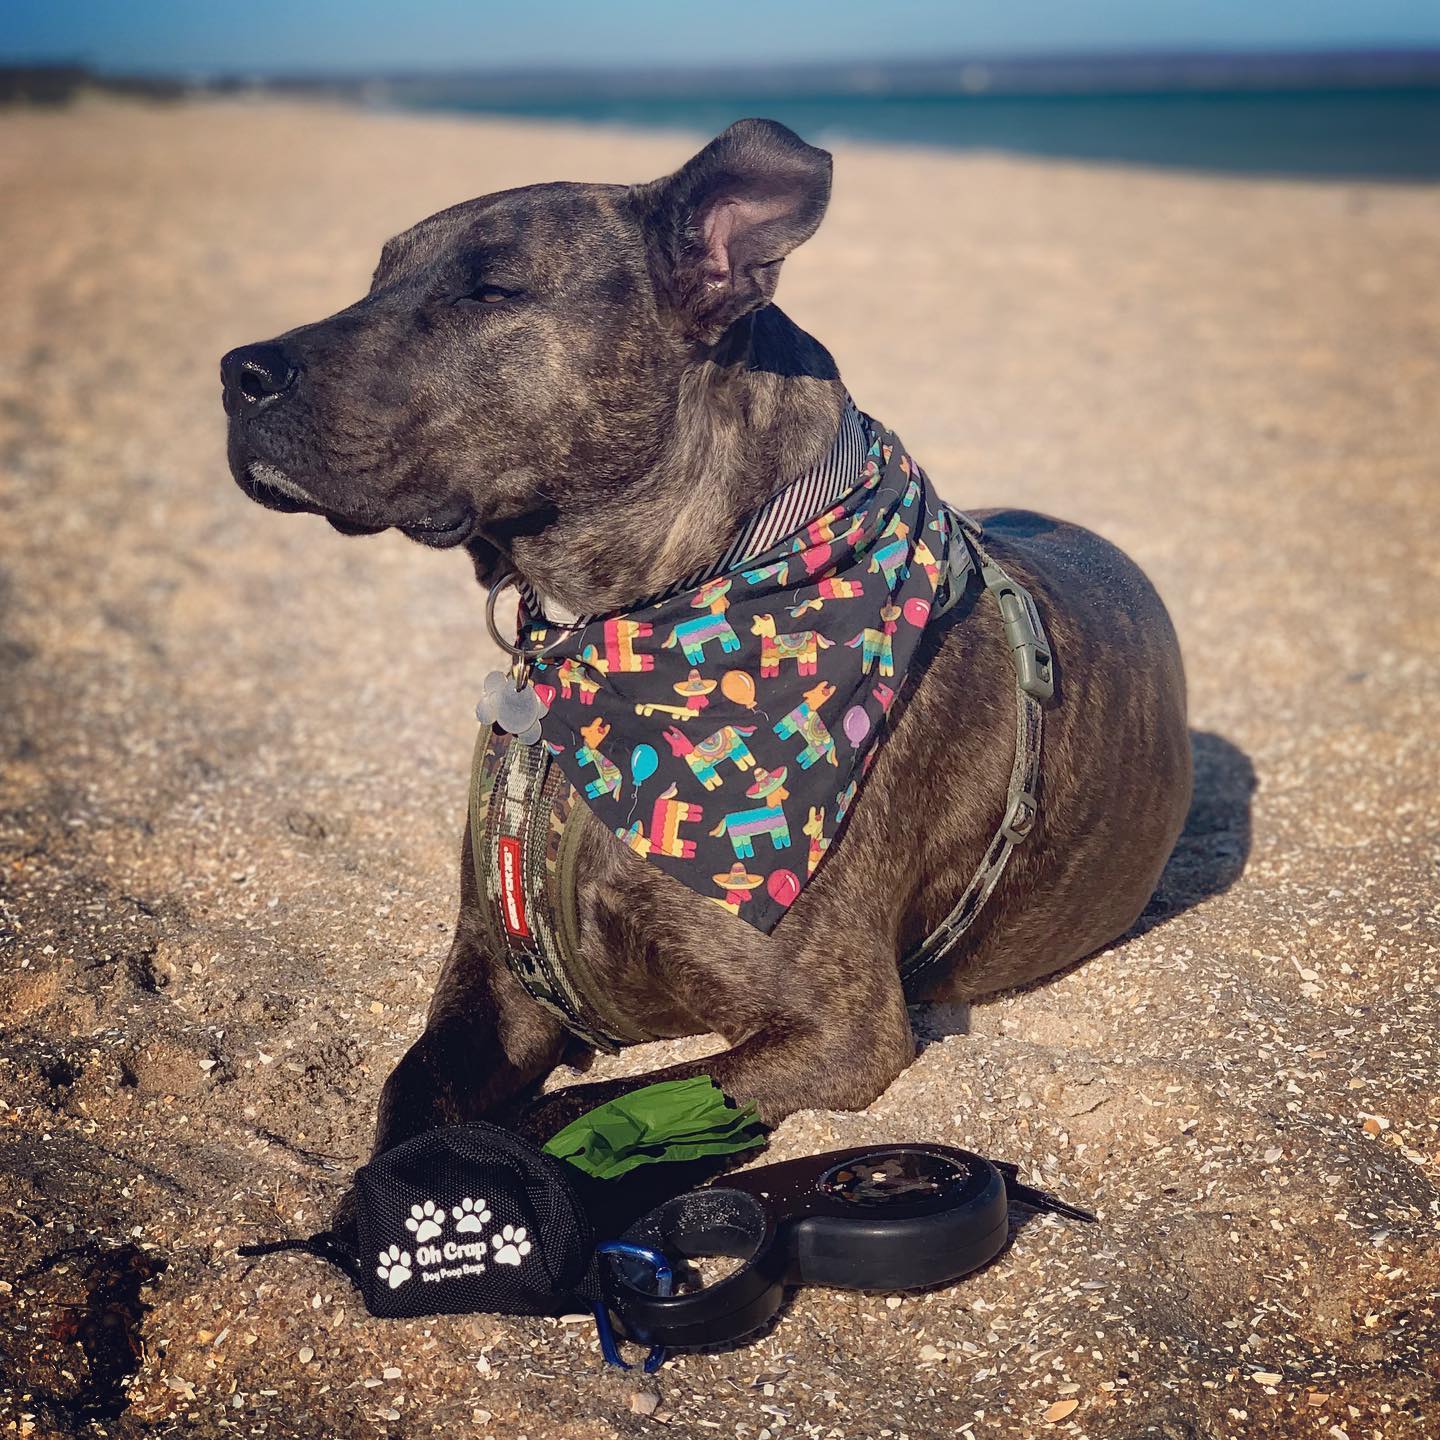 A god named @chilliwoof wearing a bandana at the beach.